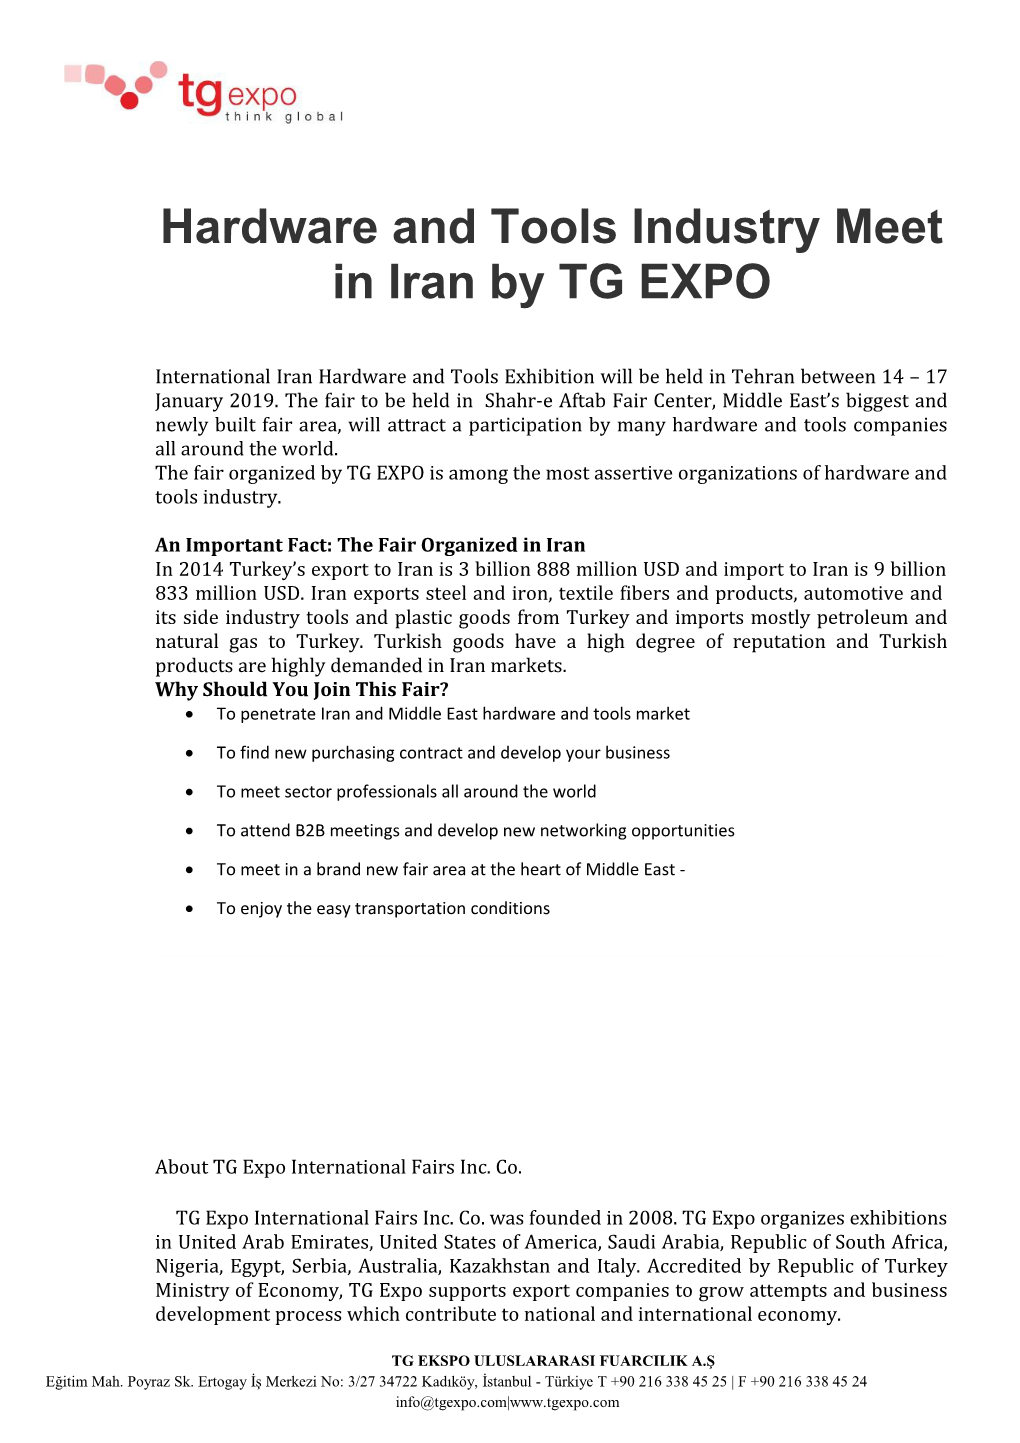 Hardware and Tools Industry Meet in Iran by TG EXPO